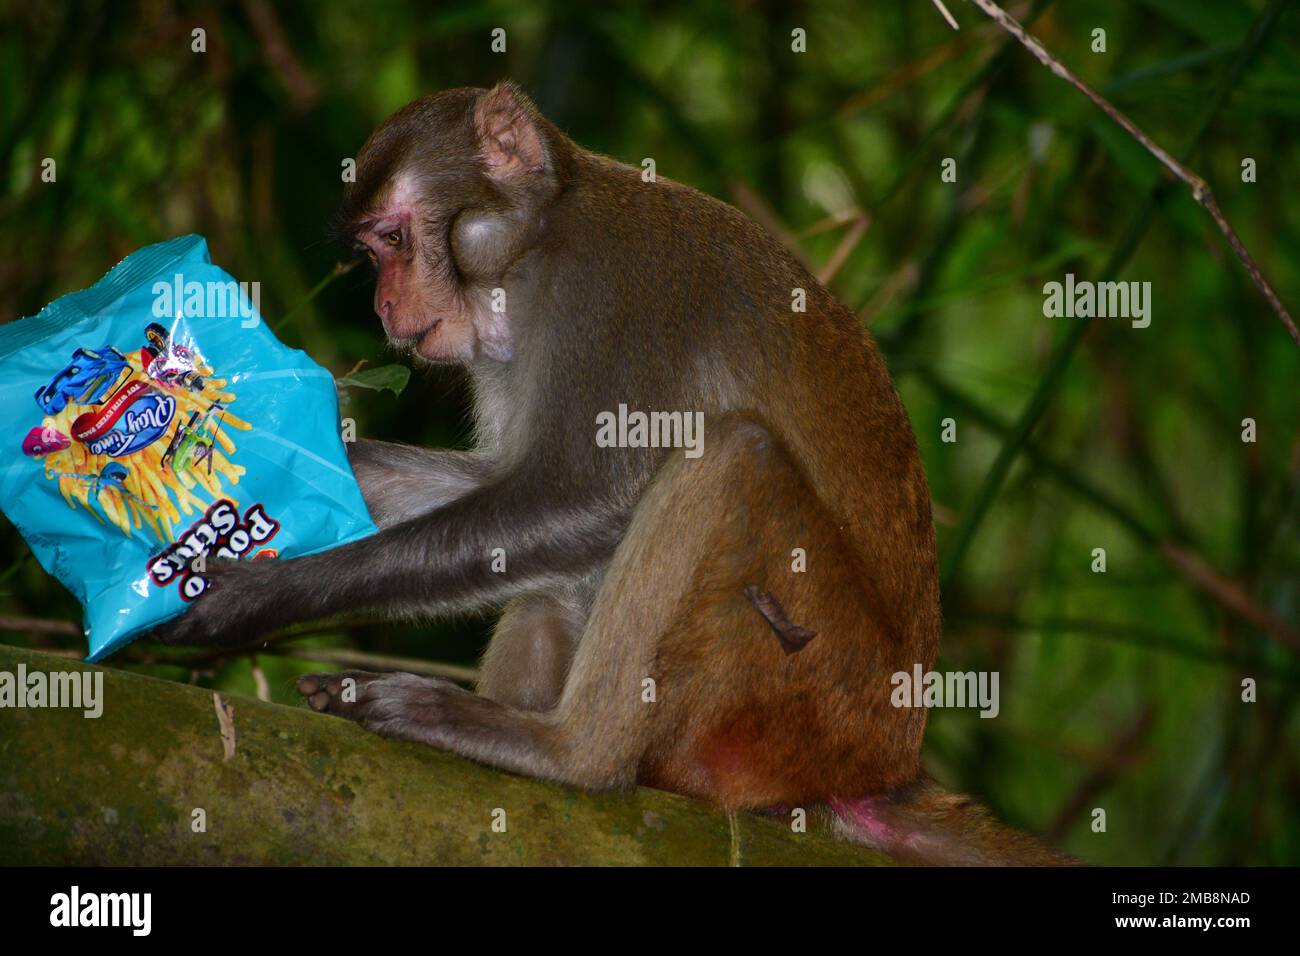 Monkey eating chips in the wild forest in Bangladesh Stock Photo